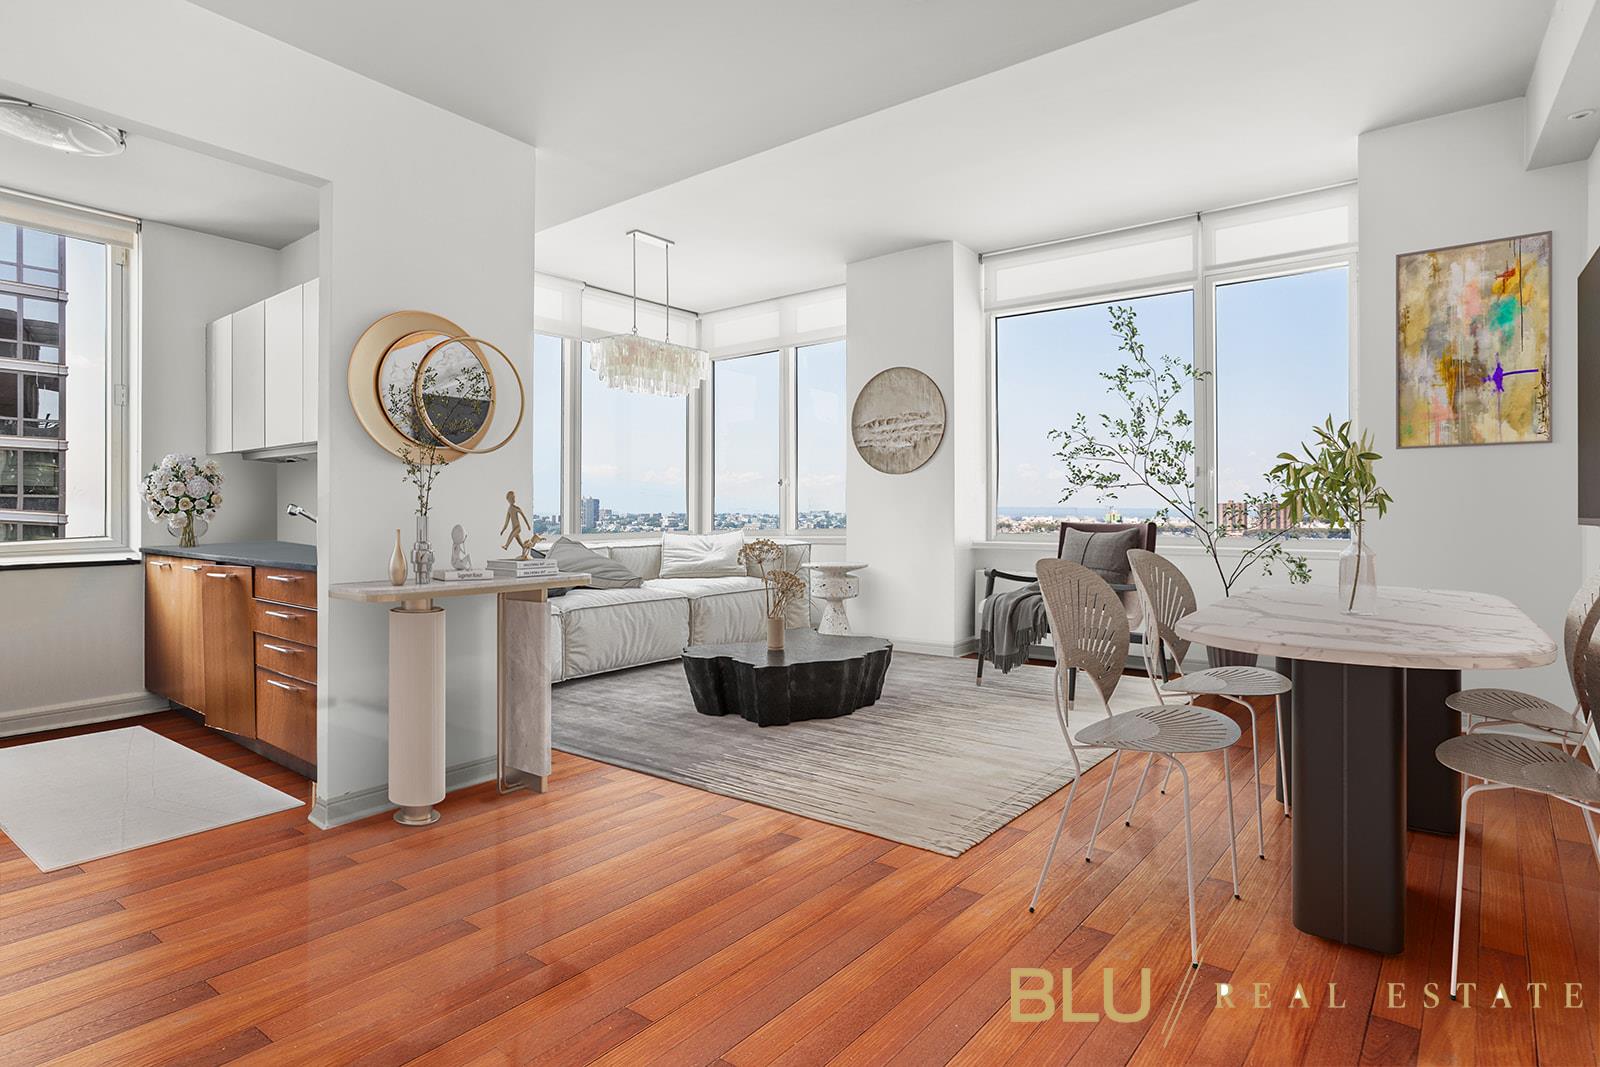 100 Riverside Boulevard 31-D, Lincoln Square, Upper West Side, NYC - 2 Bedrooms  
2 Bathrooms  
4 Rooms - 